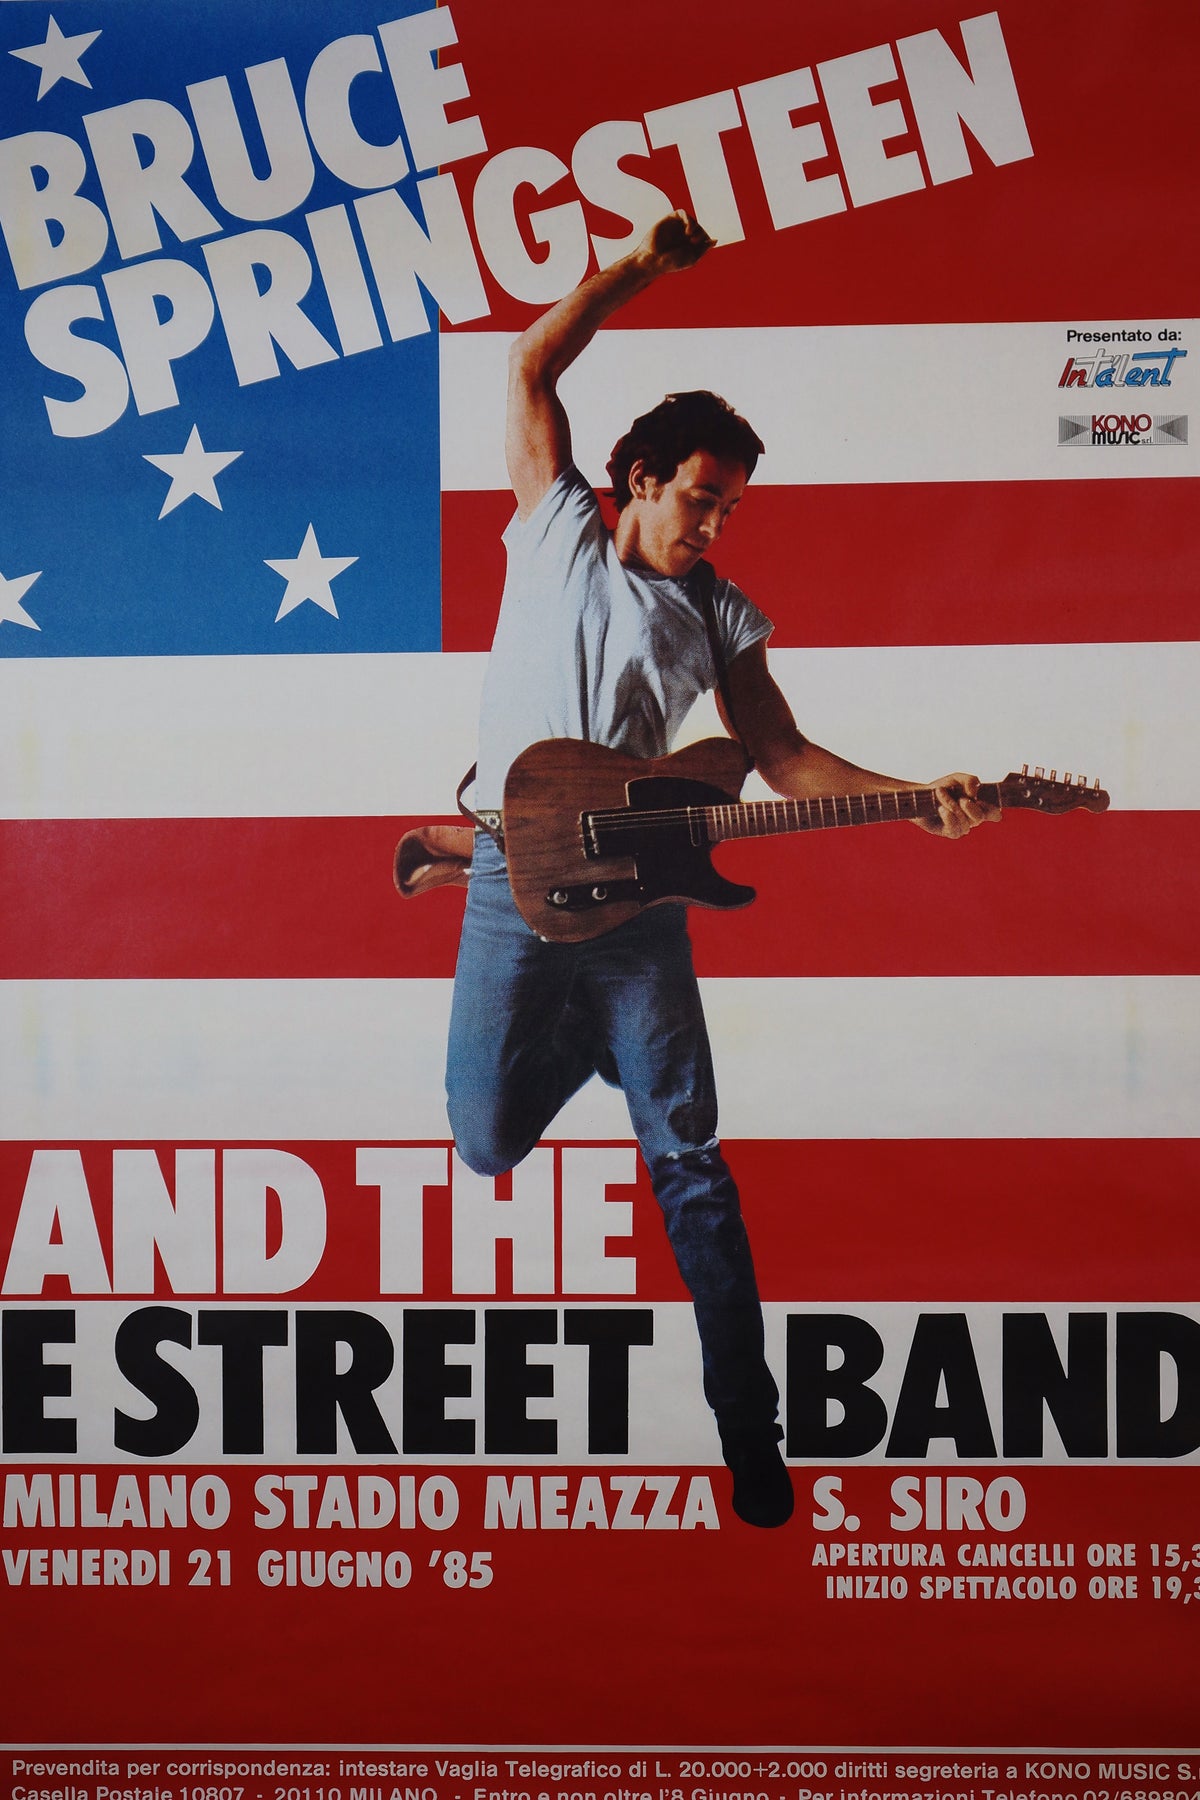 Bruce Springsteen, Milan - Authentic Vintage Poster